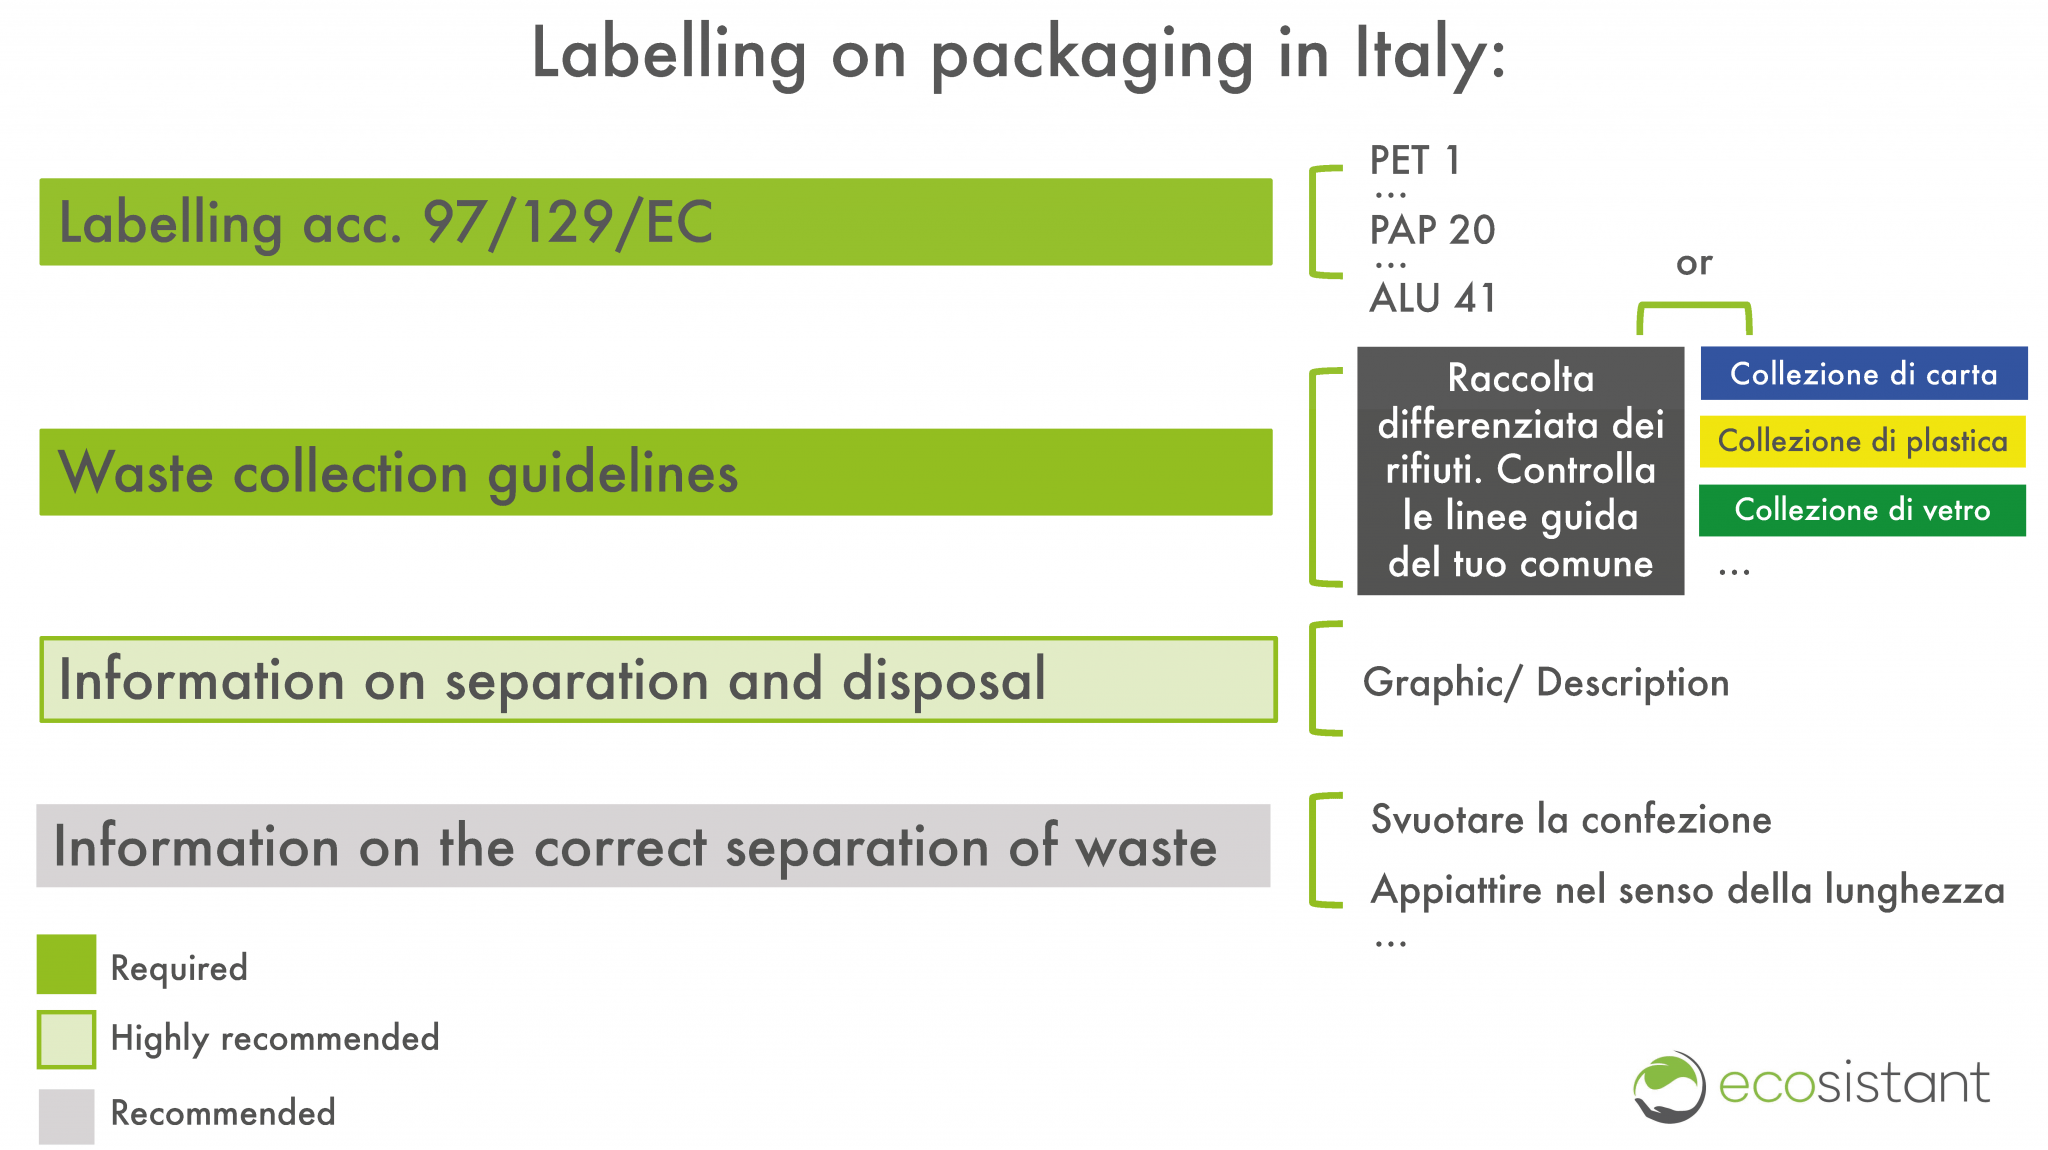 Packaging law in Italy calls for labelling obligations ecosistant